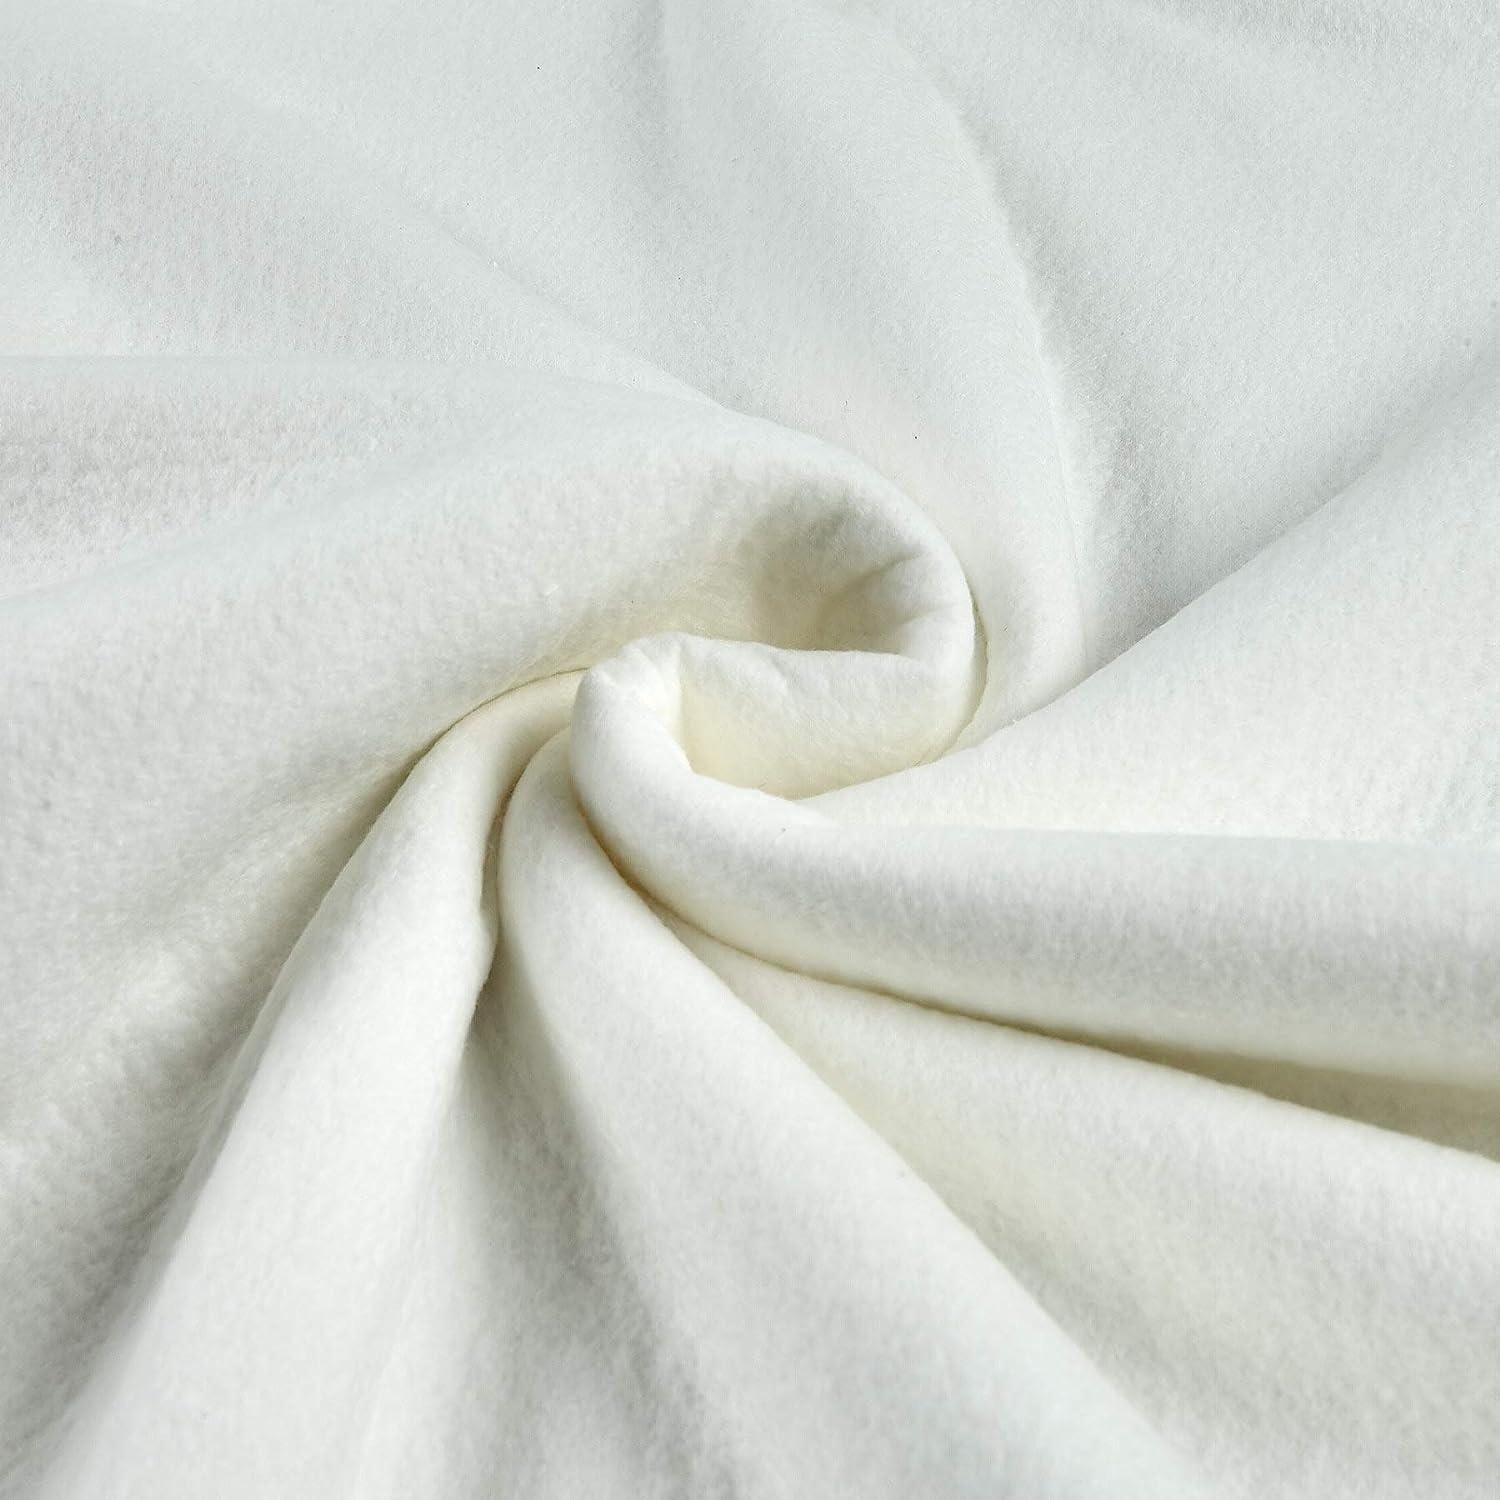 Quilters Dream WHITE select 100% cotton batting QUEEN